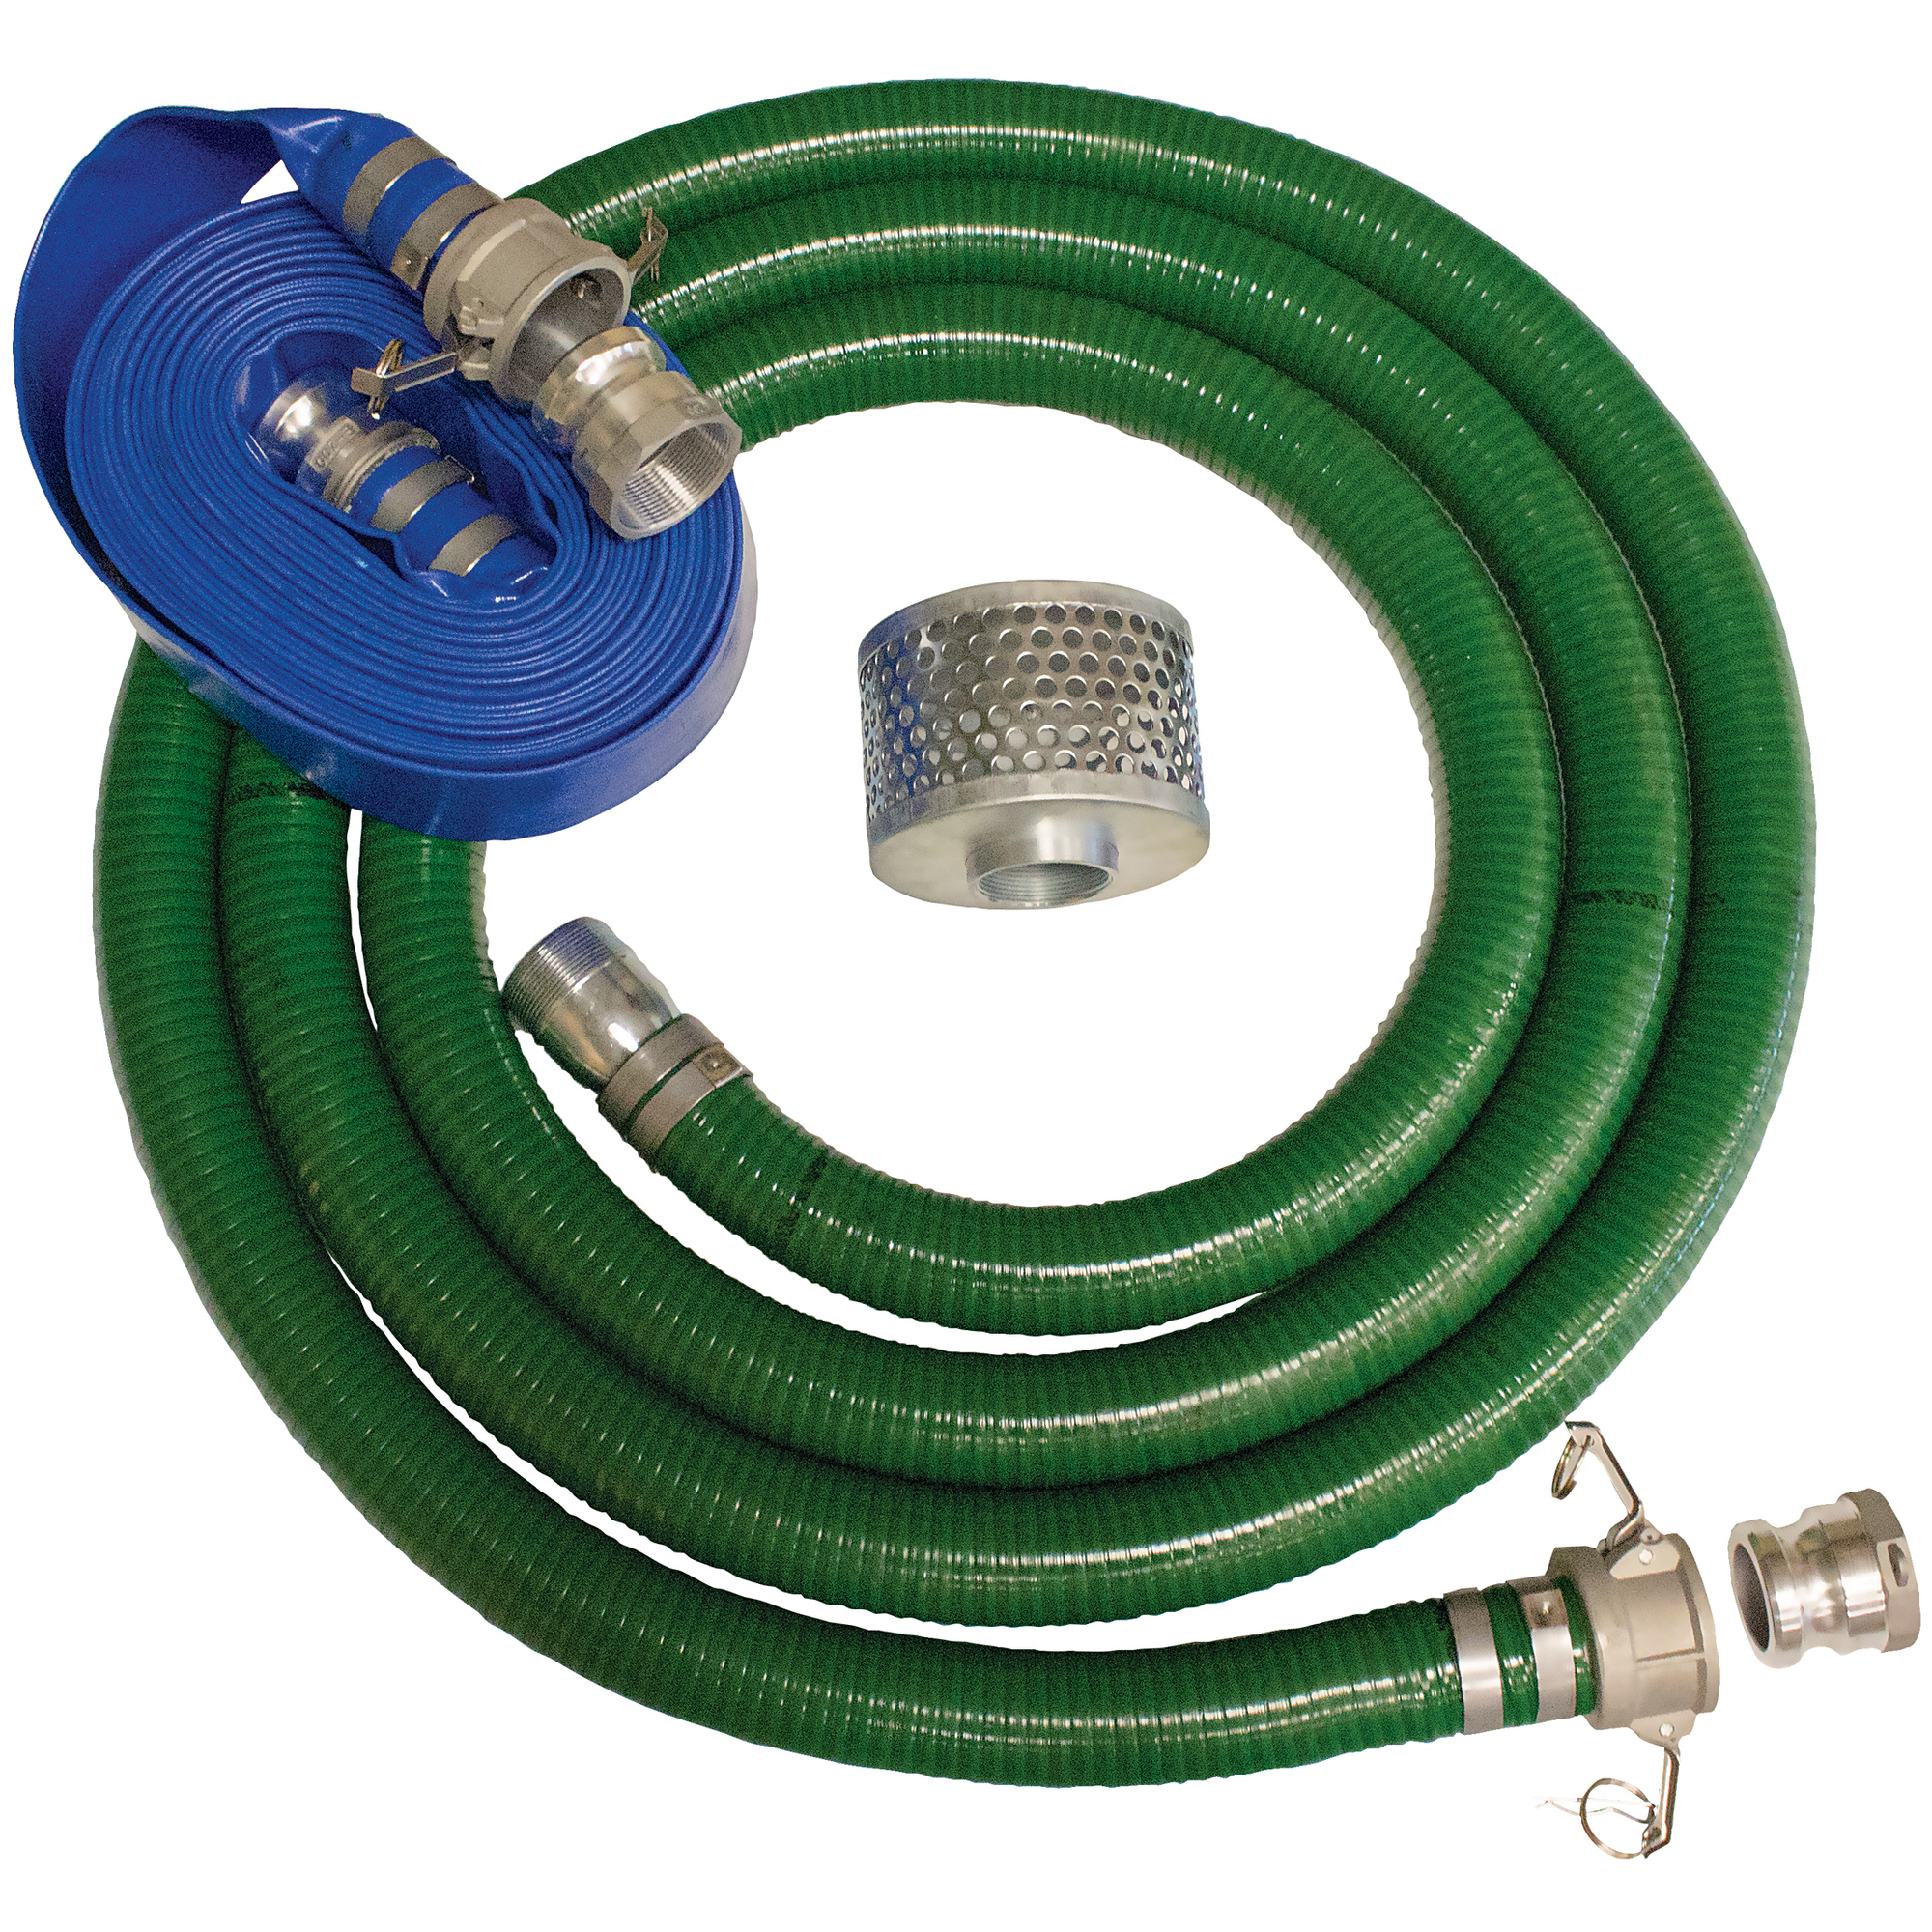 3Inch Hose Kit with 20ft. intake and 50ft. discharge, Hose Diameter 3 in, Hose Length 0 ft, Max. PSI 65, Model - Brave BRHK3